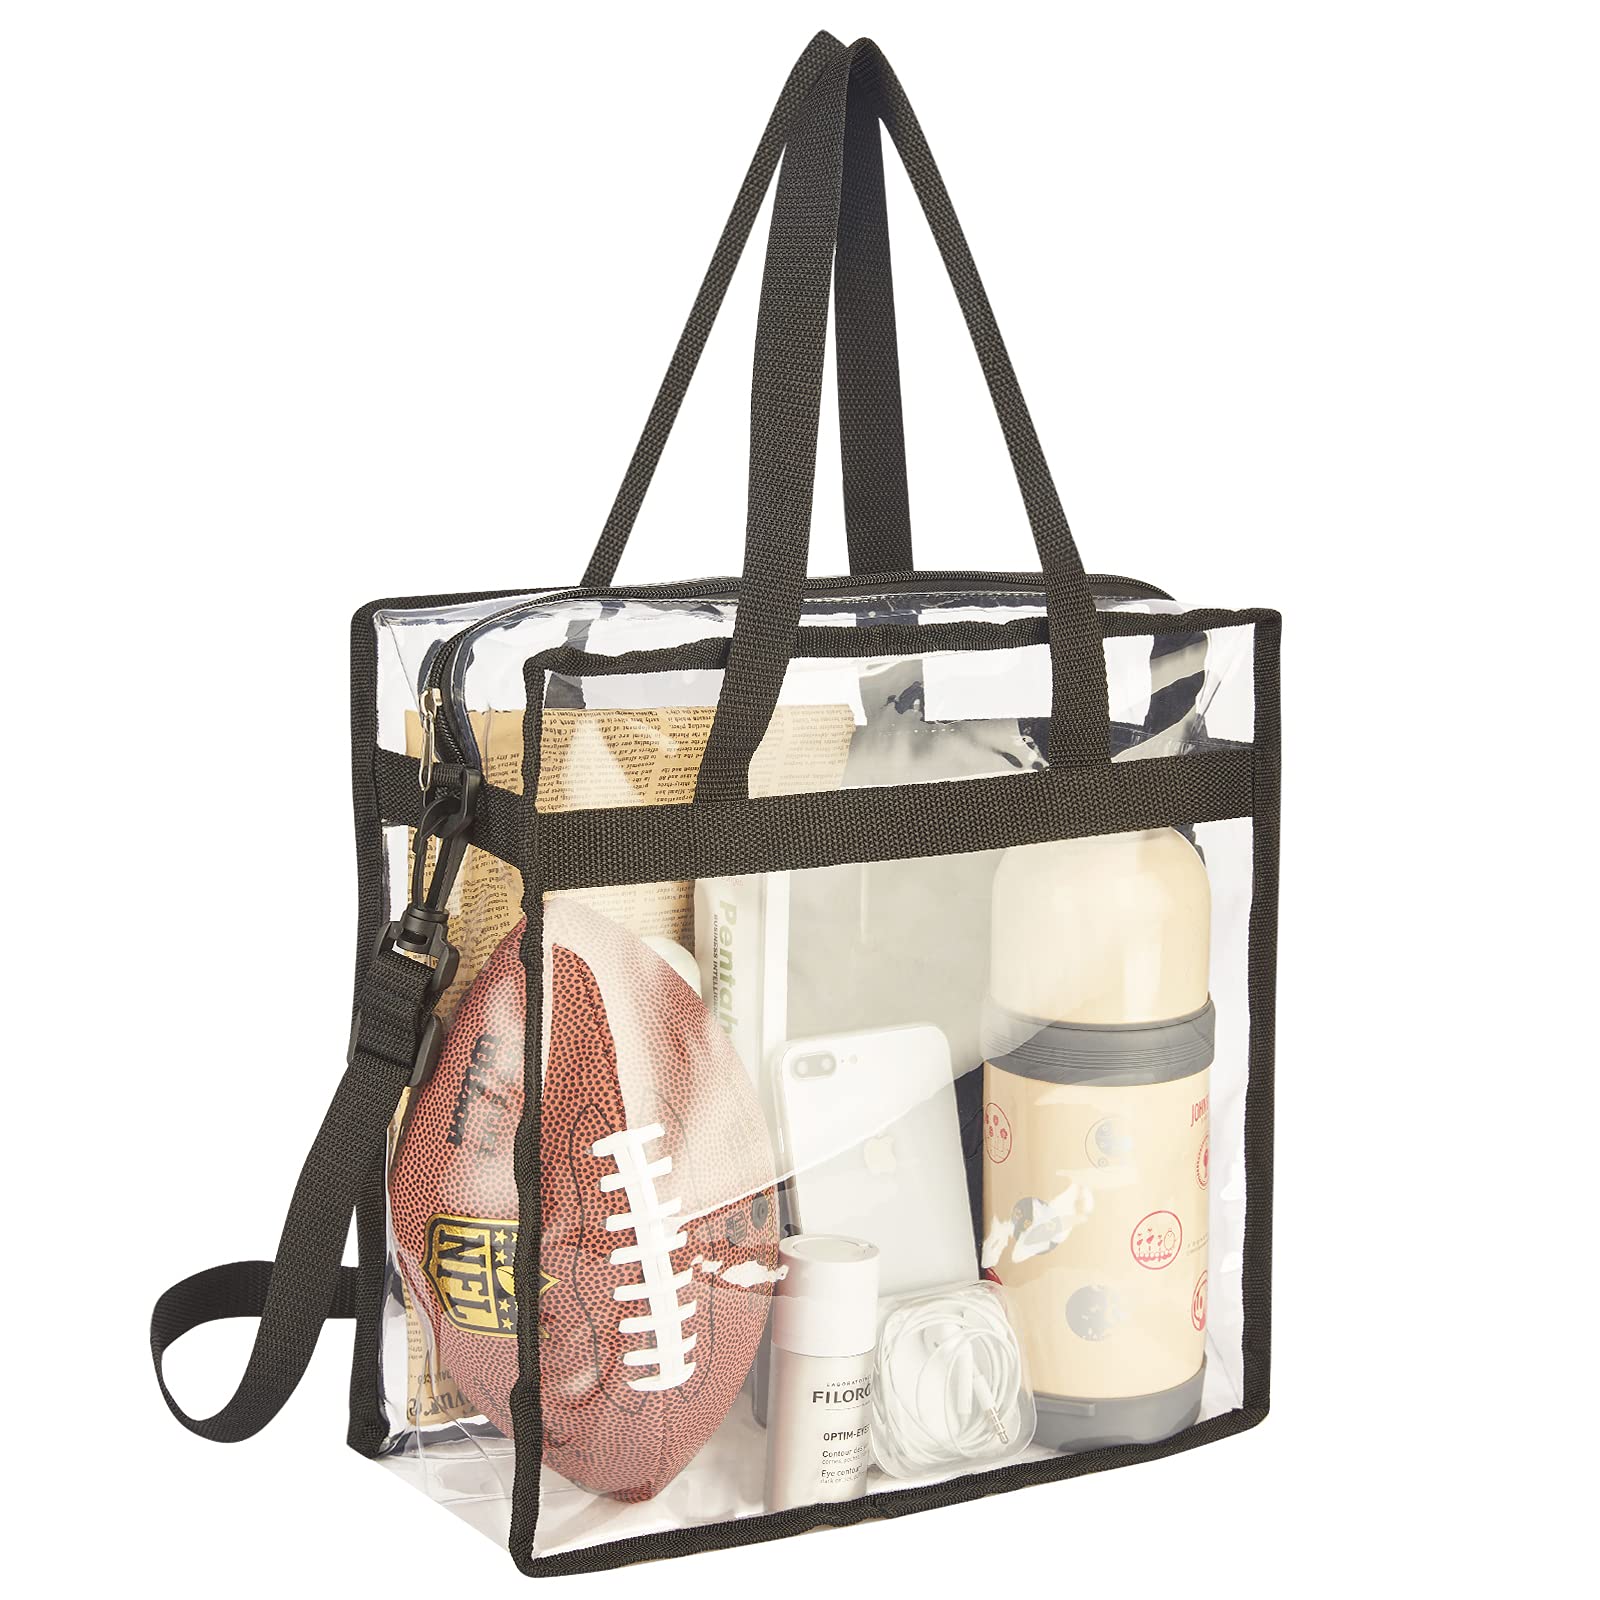 Purse-Style Security Vinyl Bags